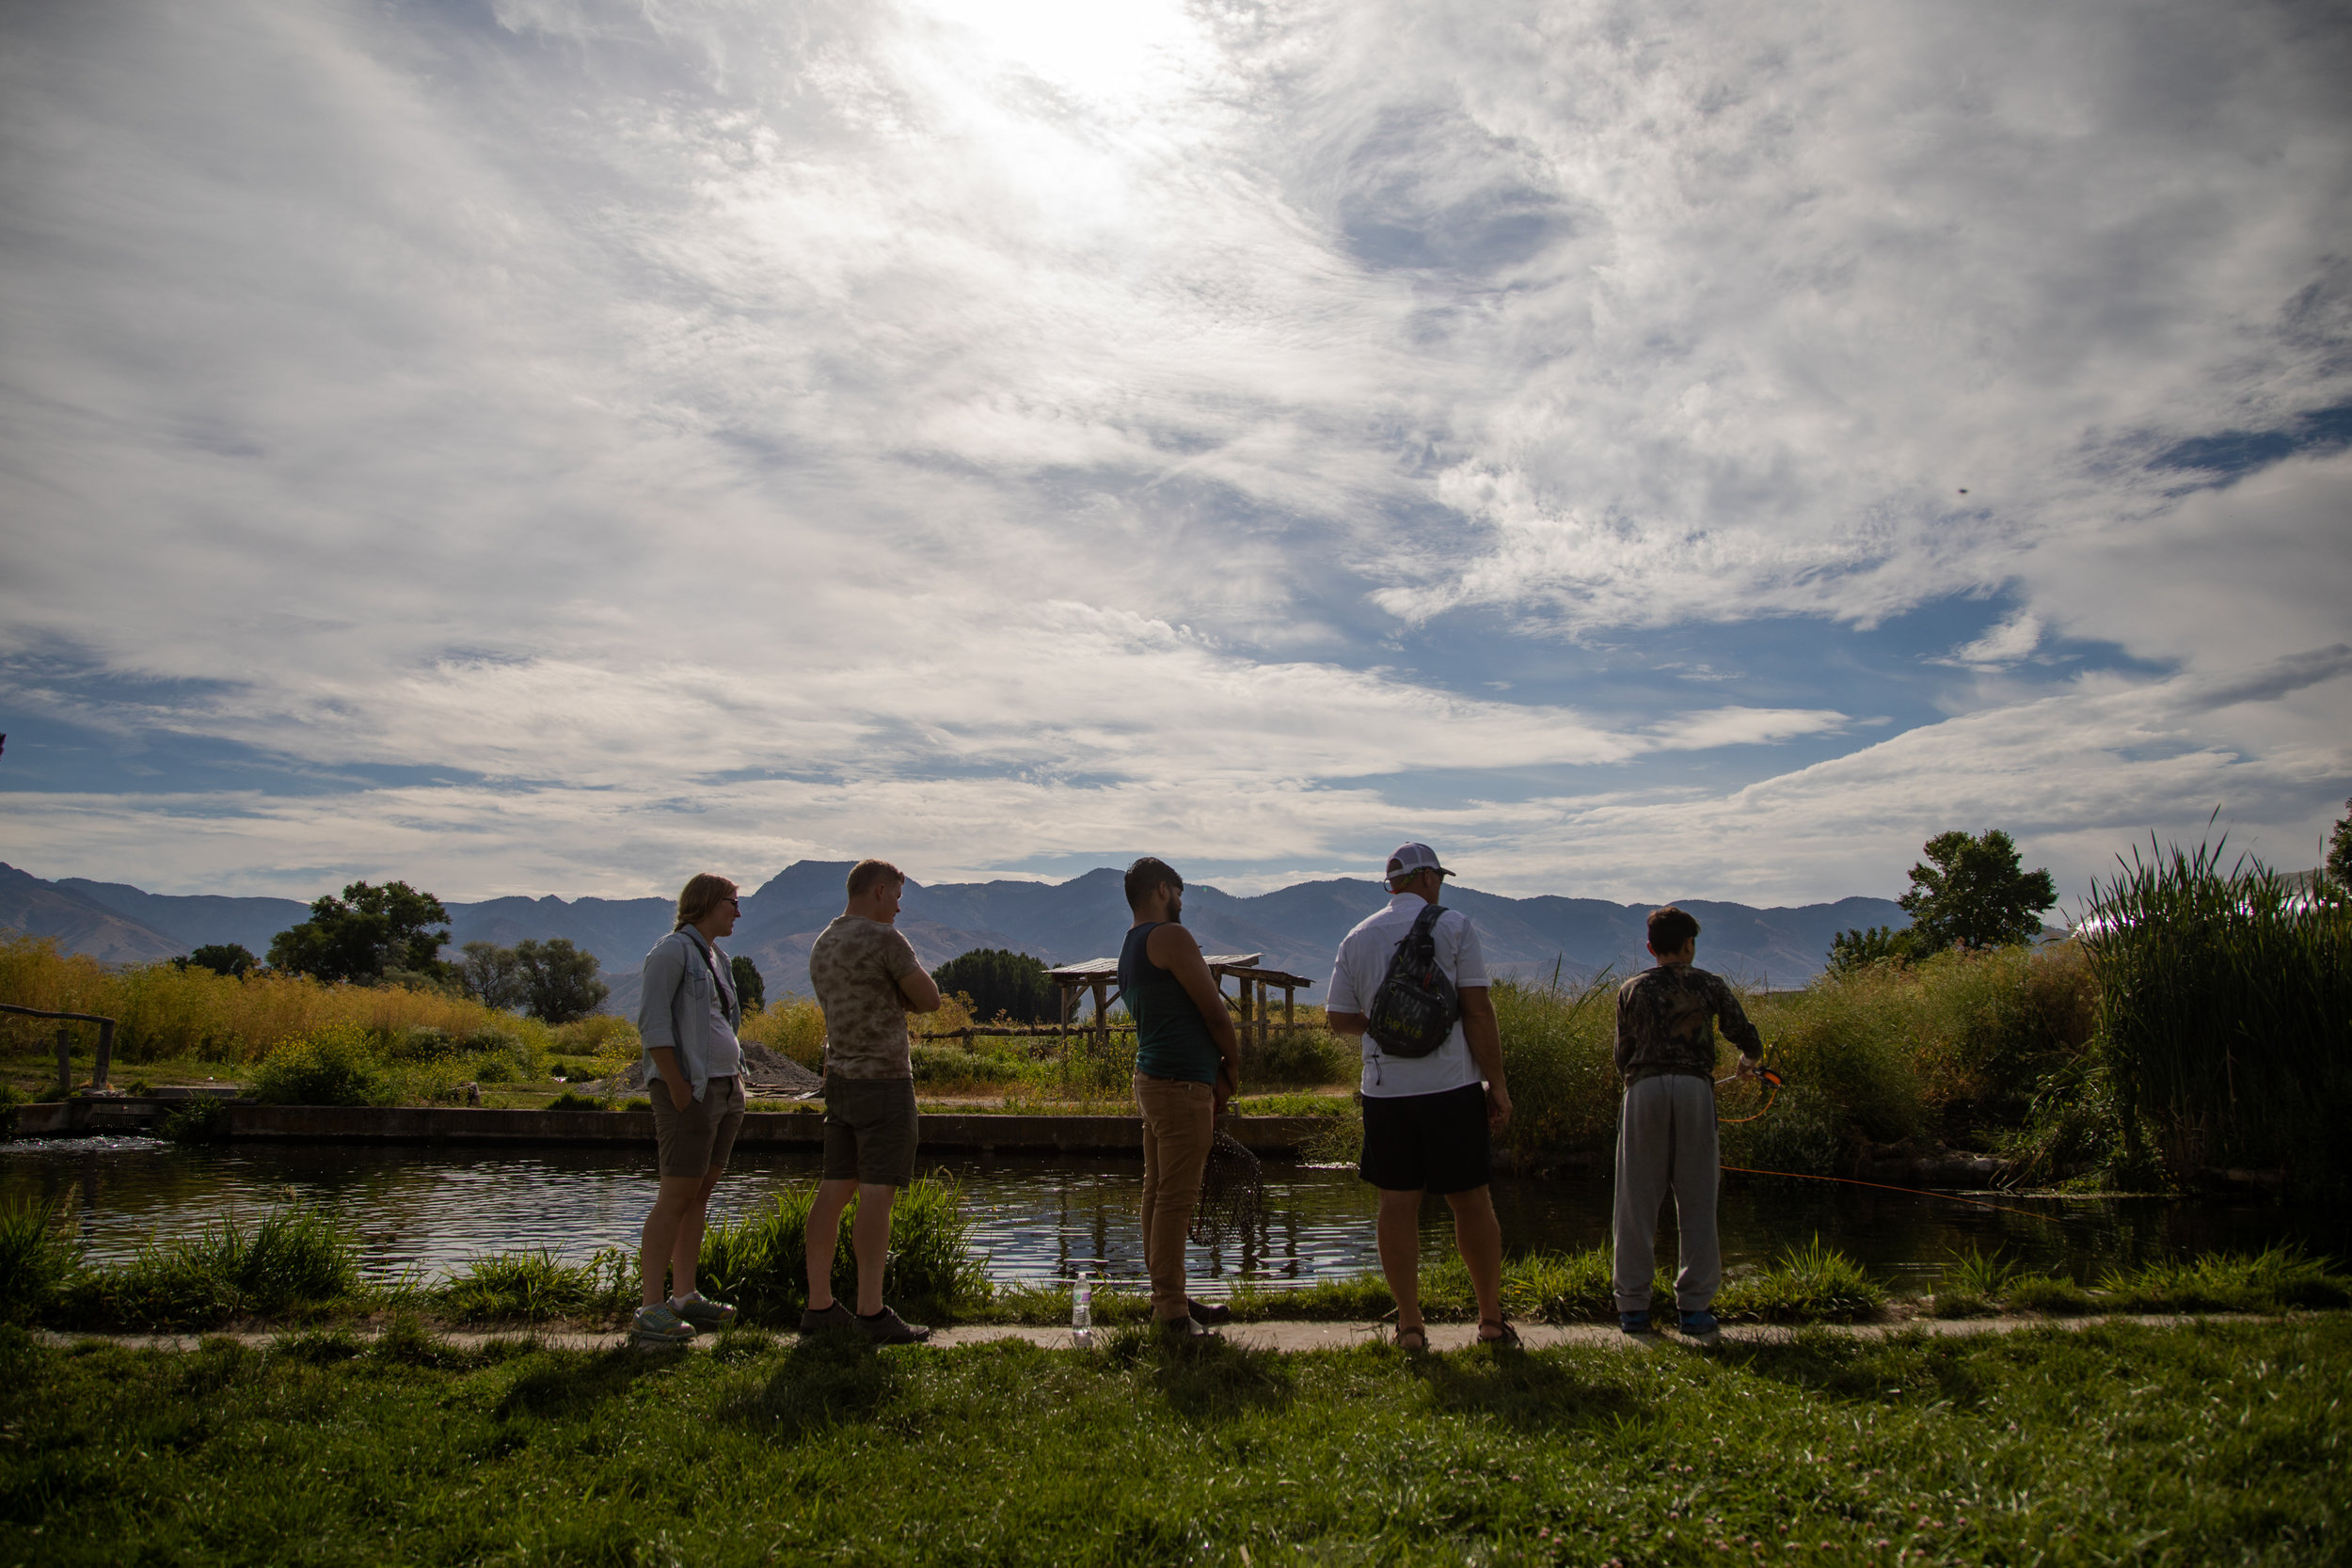  Utah foster care children fly fish on a trout pond on Saturday, July 14, 2018, in Smithfield. The outing was one of several this summer that was part of The Mayfly Project, a national non-profit that uses fly fishing to mentor foster care children. 